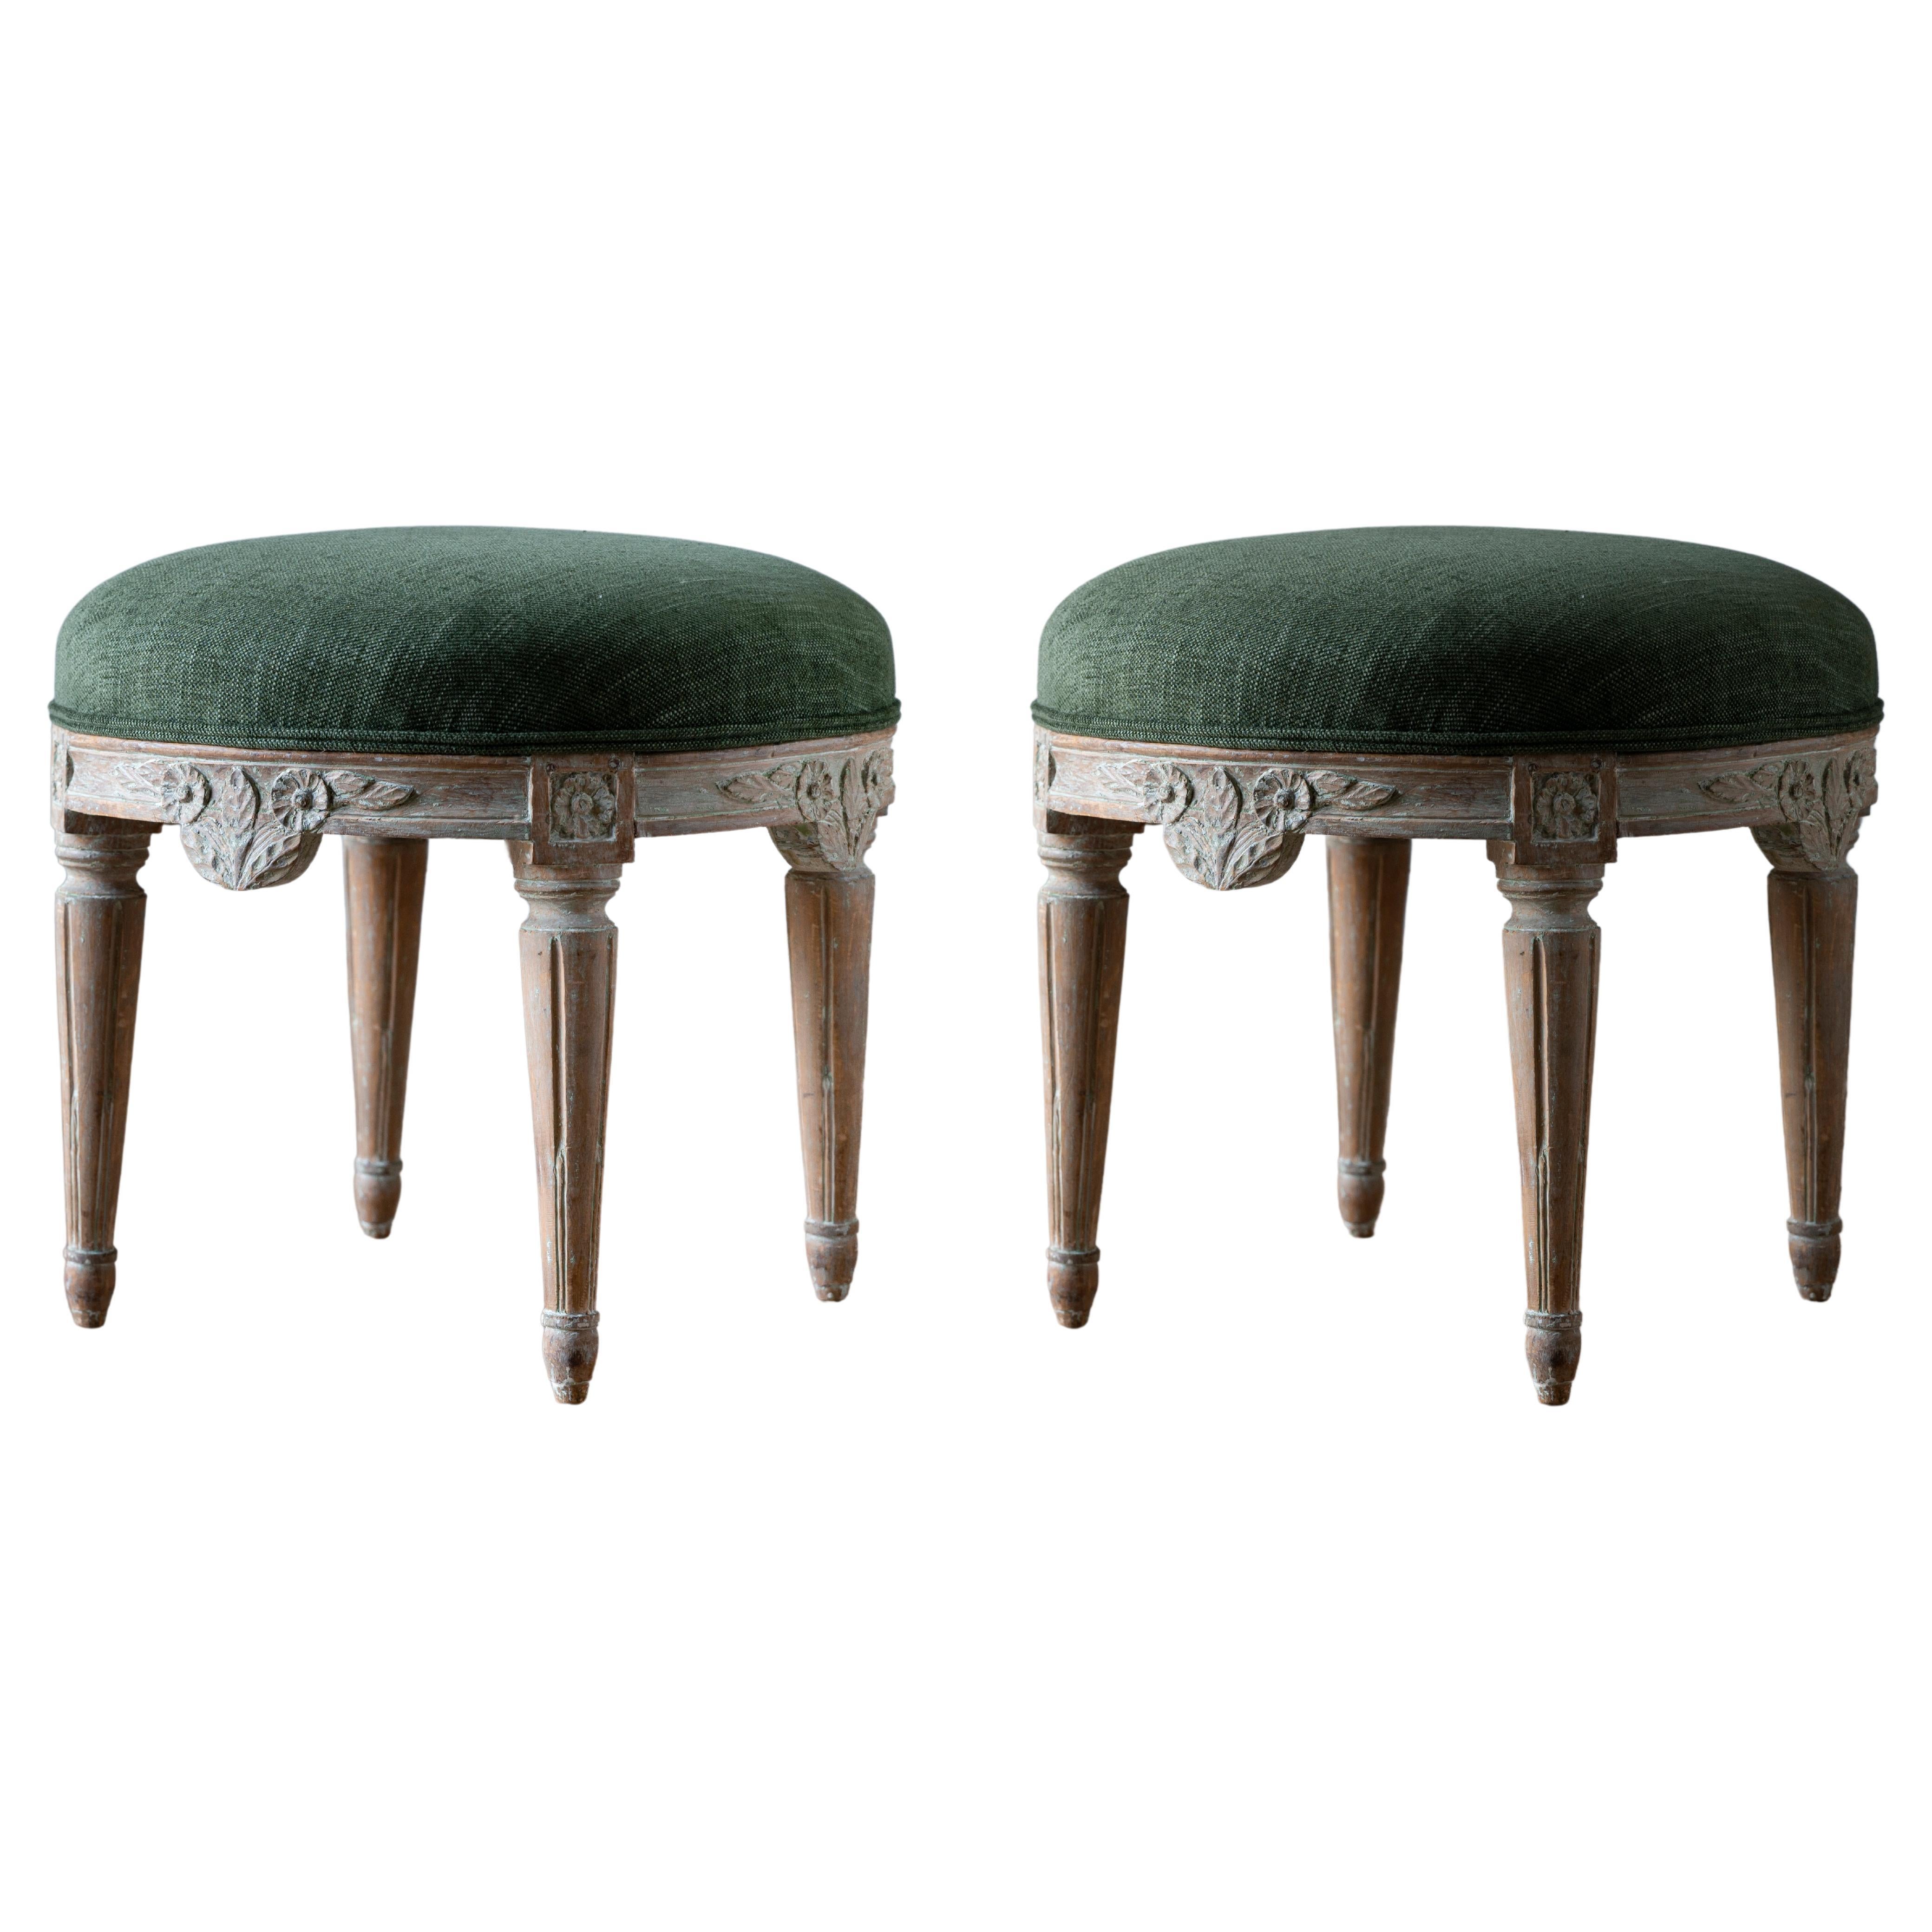 Exceptional pair of 19th Century Gustavian Stools